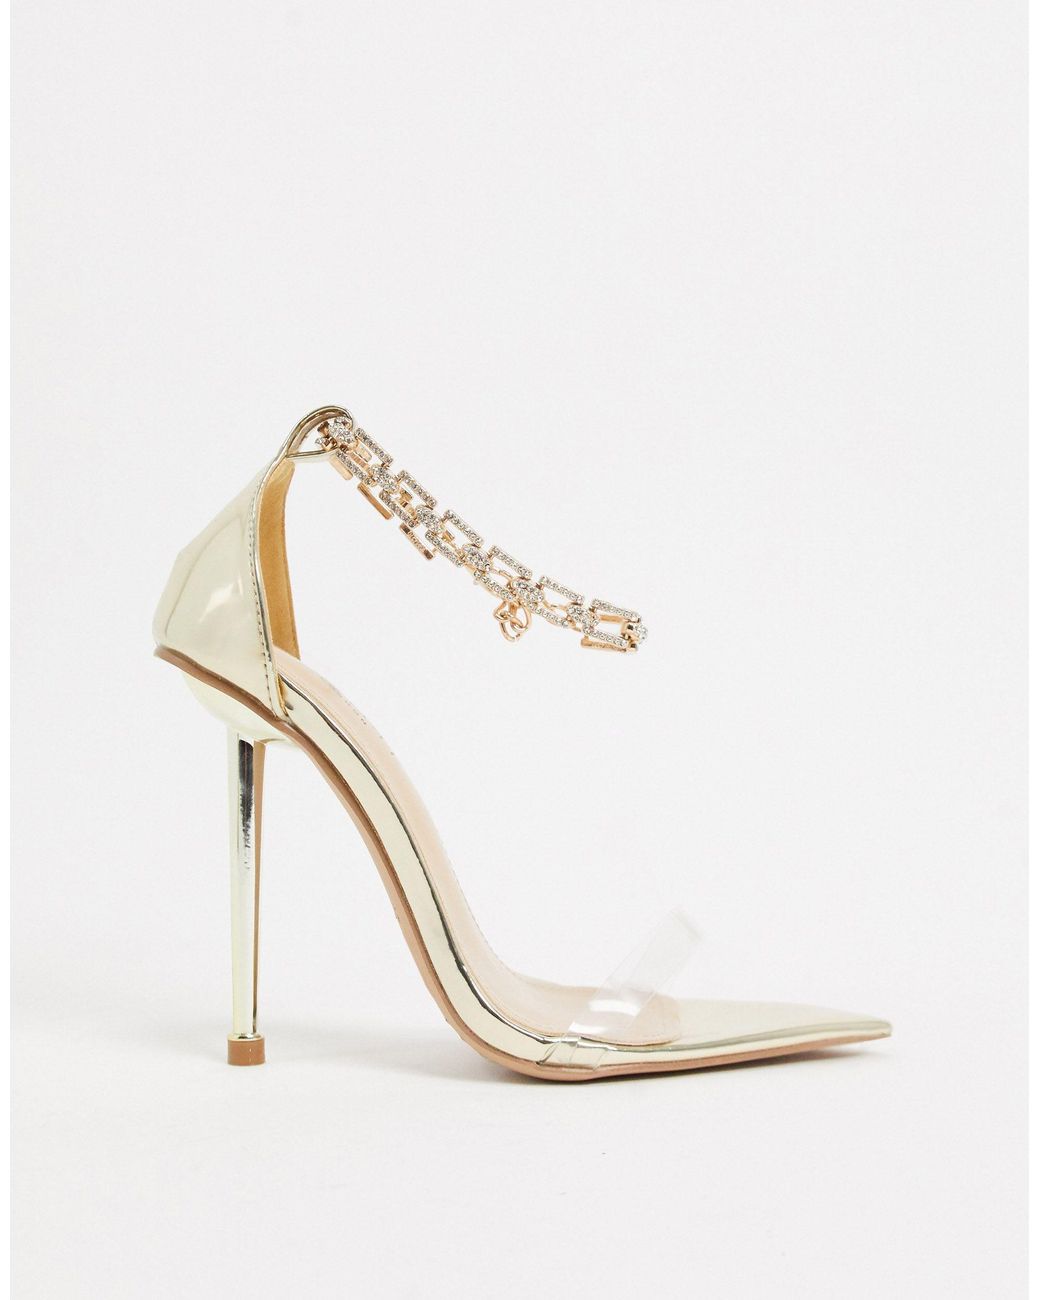 SIMMI Shoes Simmi London Felicia Heeled Sandals With Diamante Anklet in ...